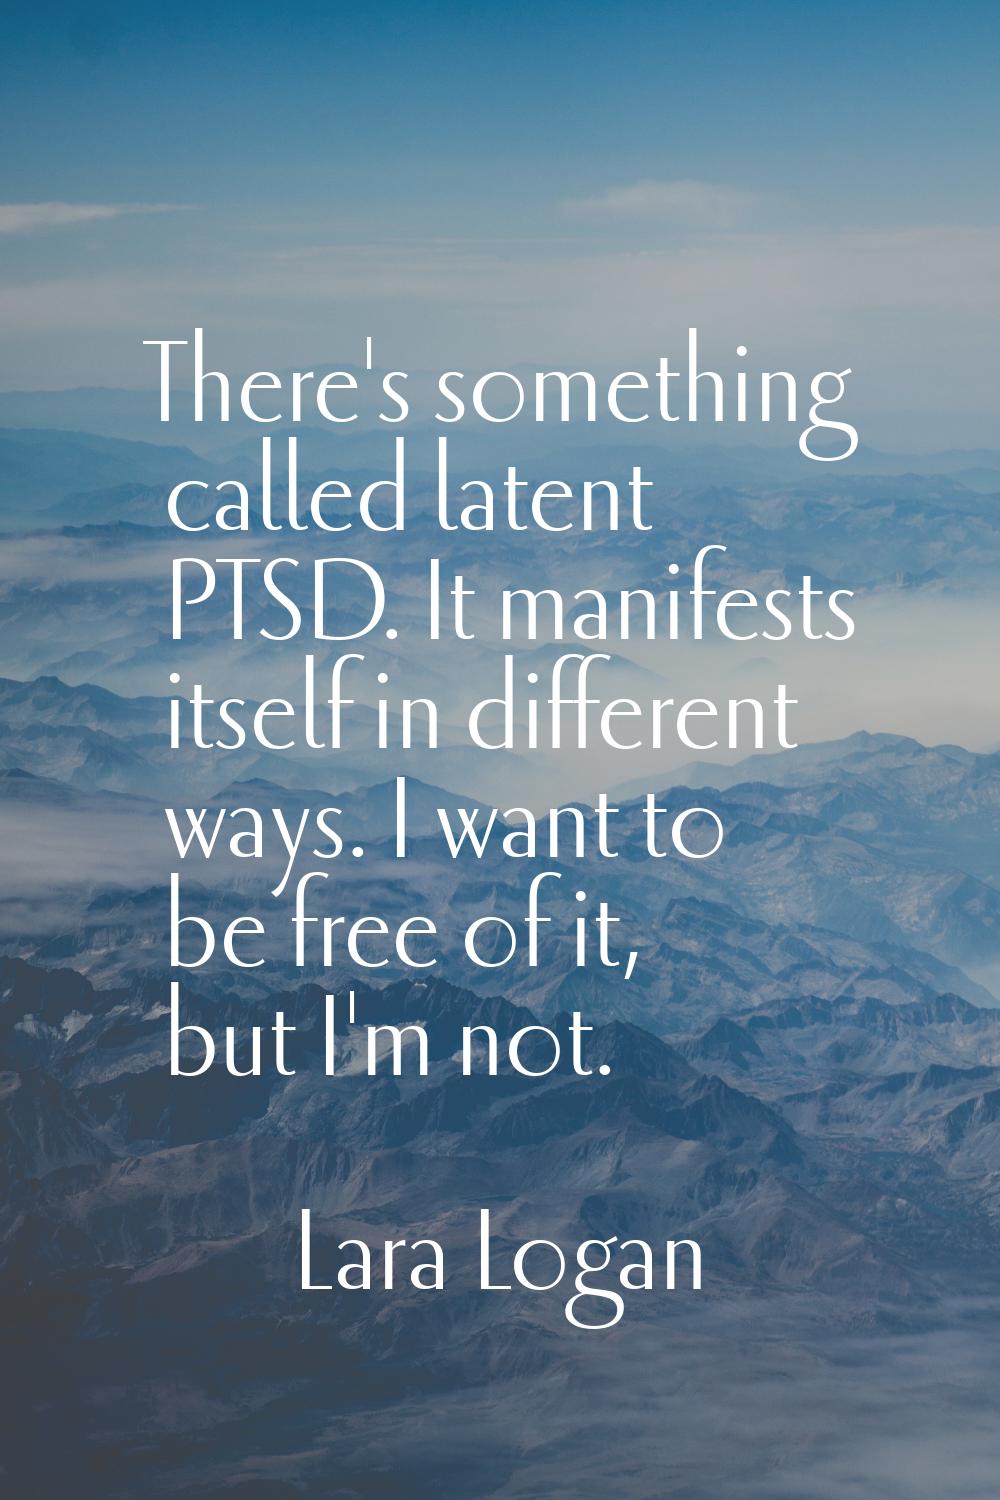 There's something called latent PTSD. It manifests itself in different ways. I want to be free of i